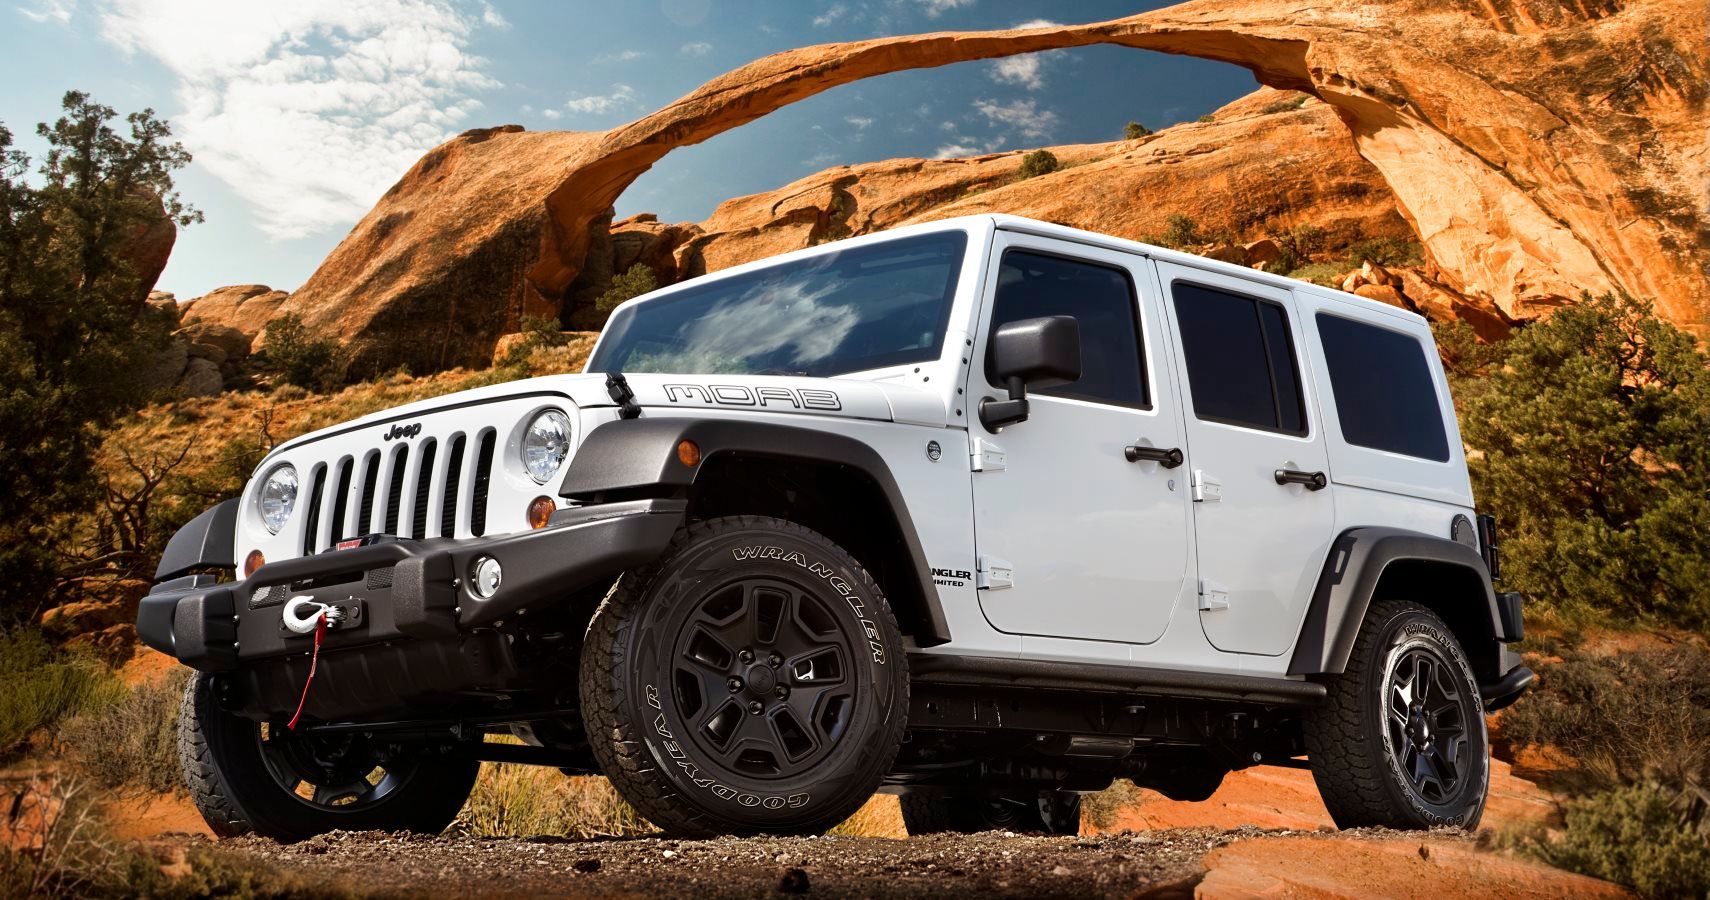 2019 Jeep Wrangler Moab Order Guide Offers Multiple Trim Options